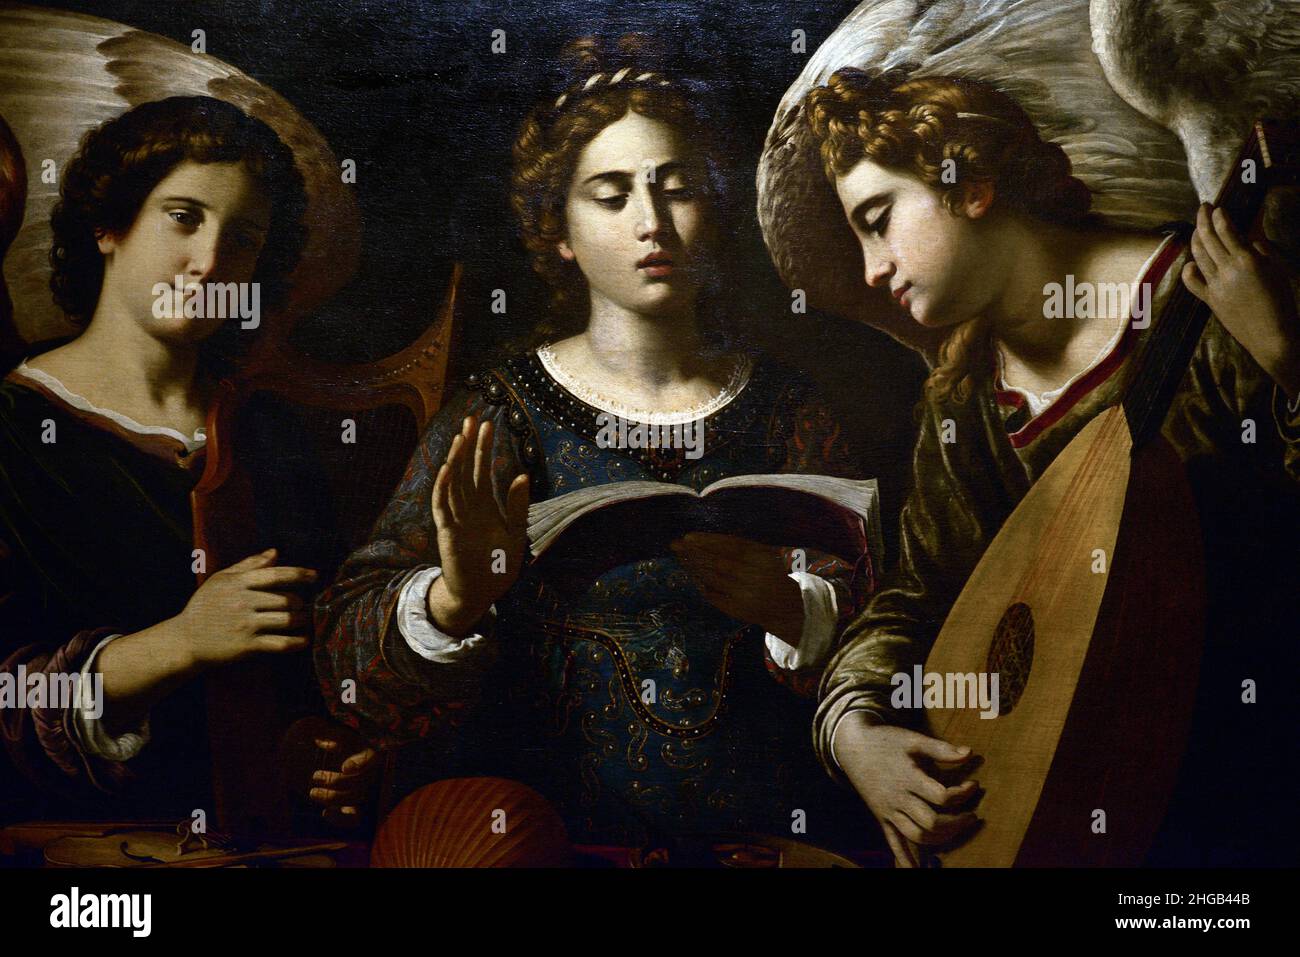 Antiveduto Grammatica (1571-1626). Italian painter. Saint Cecilia with two Angels, ca.1620. Detail. Oil on canvas (100 x 126 cm). National Museum of Ancient Art. Lisbon, Portugal. Stock Photo